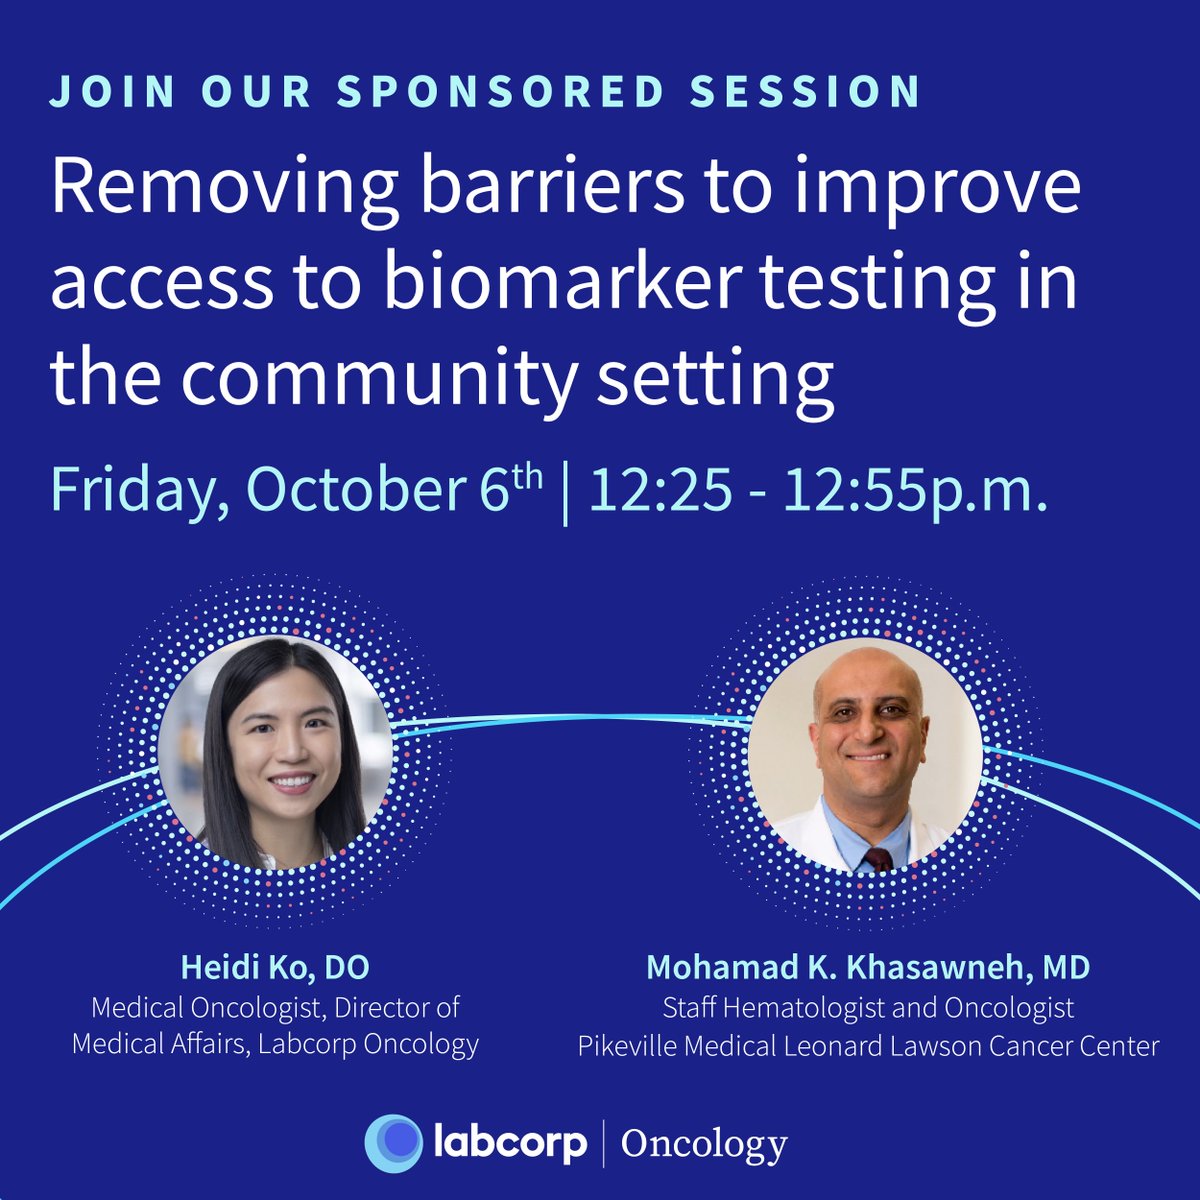 Attending the ACCC 40th National Oncology Conference in Austin, Texas? Join us for a sponsored session with Drs. Heidi Ko, DO, and Mohamad K. Khasawneh, MD, on how we are improving access to #biomarker testing in the community setting. #ACCCNOC